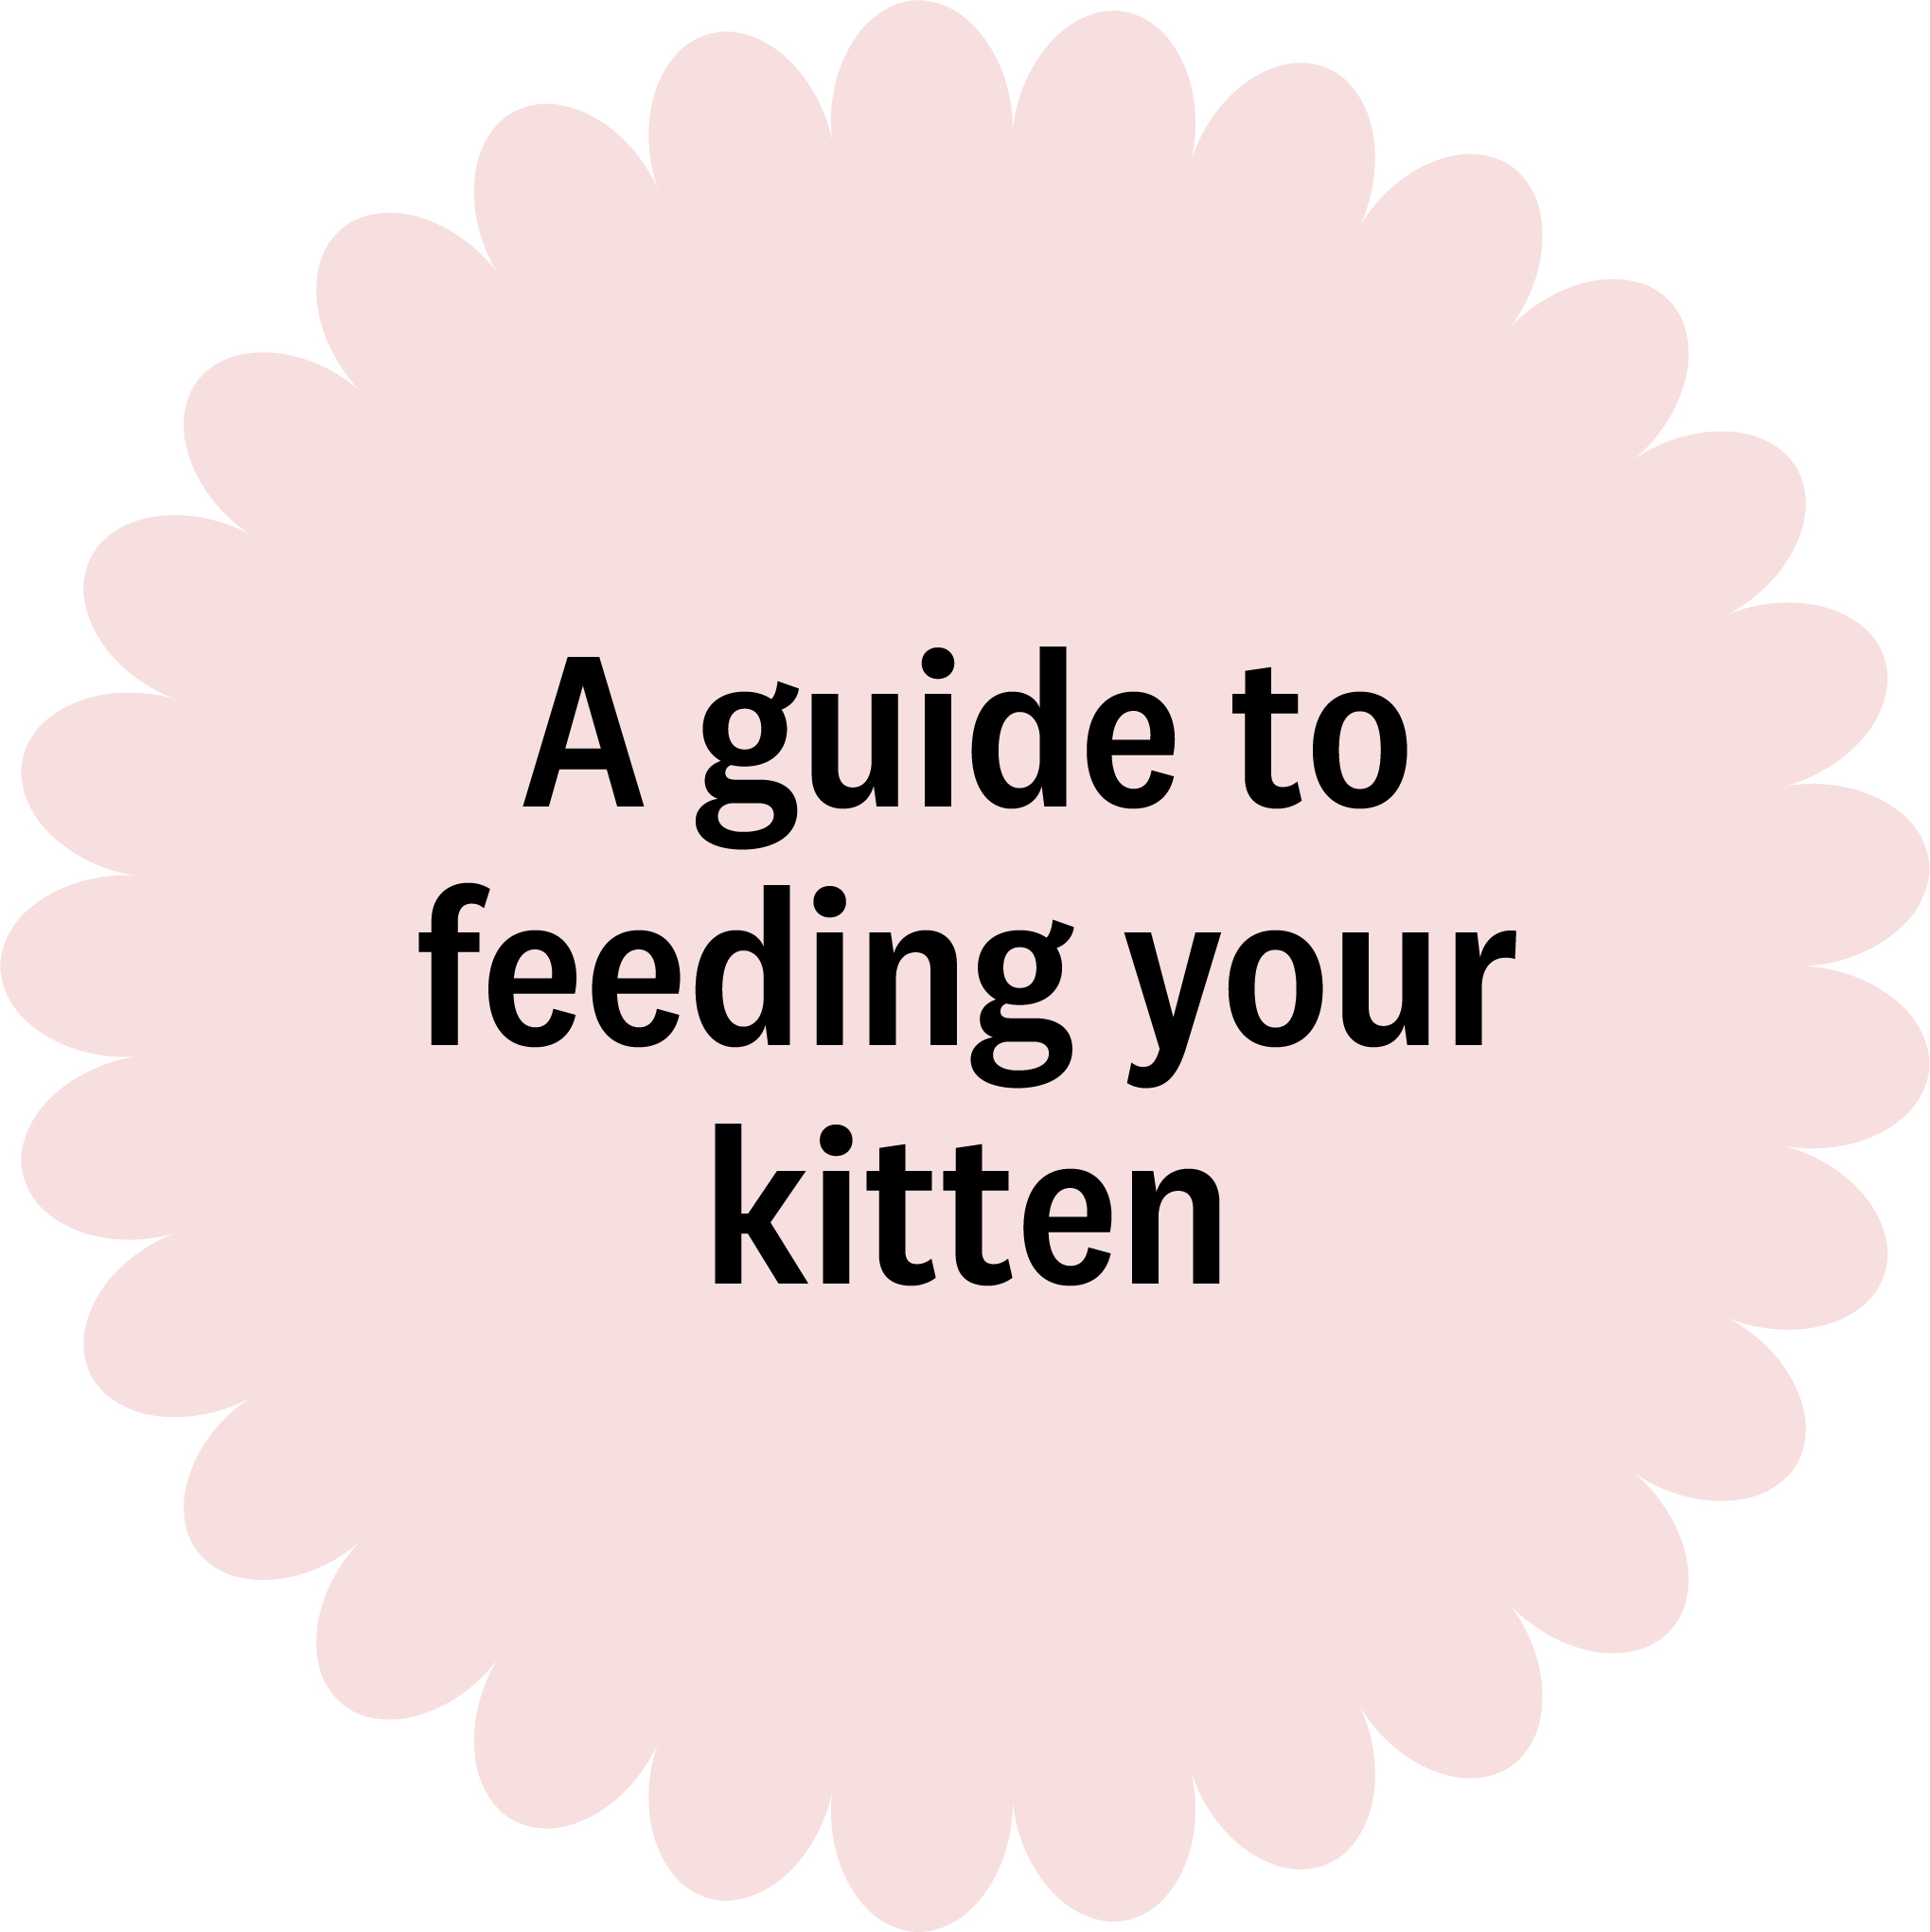 A guide to feeding your kitten